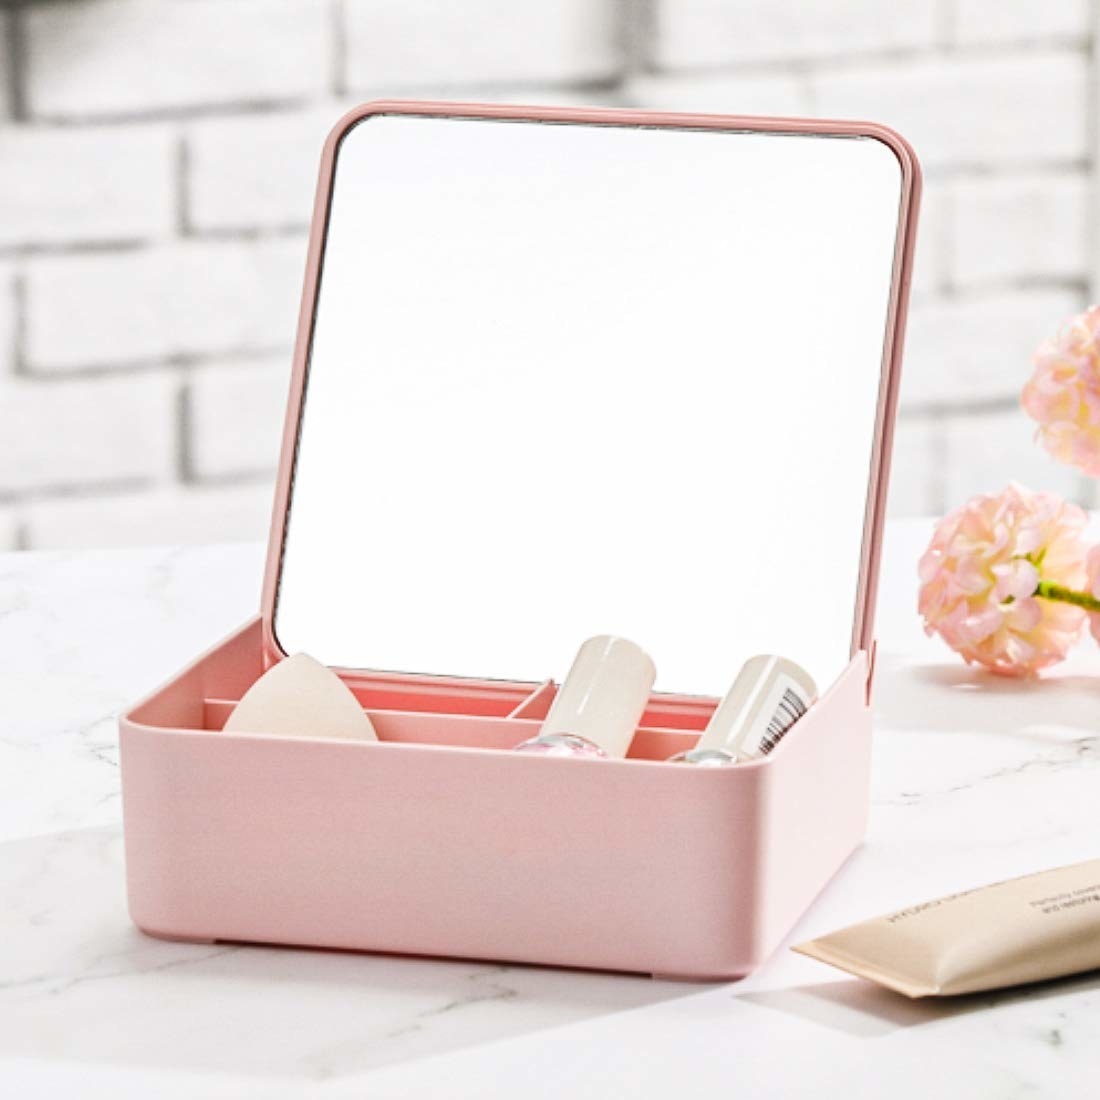 A pink mirror with makeup products in the storage compartment